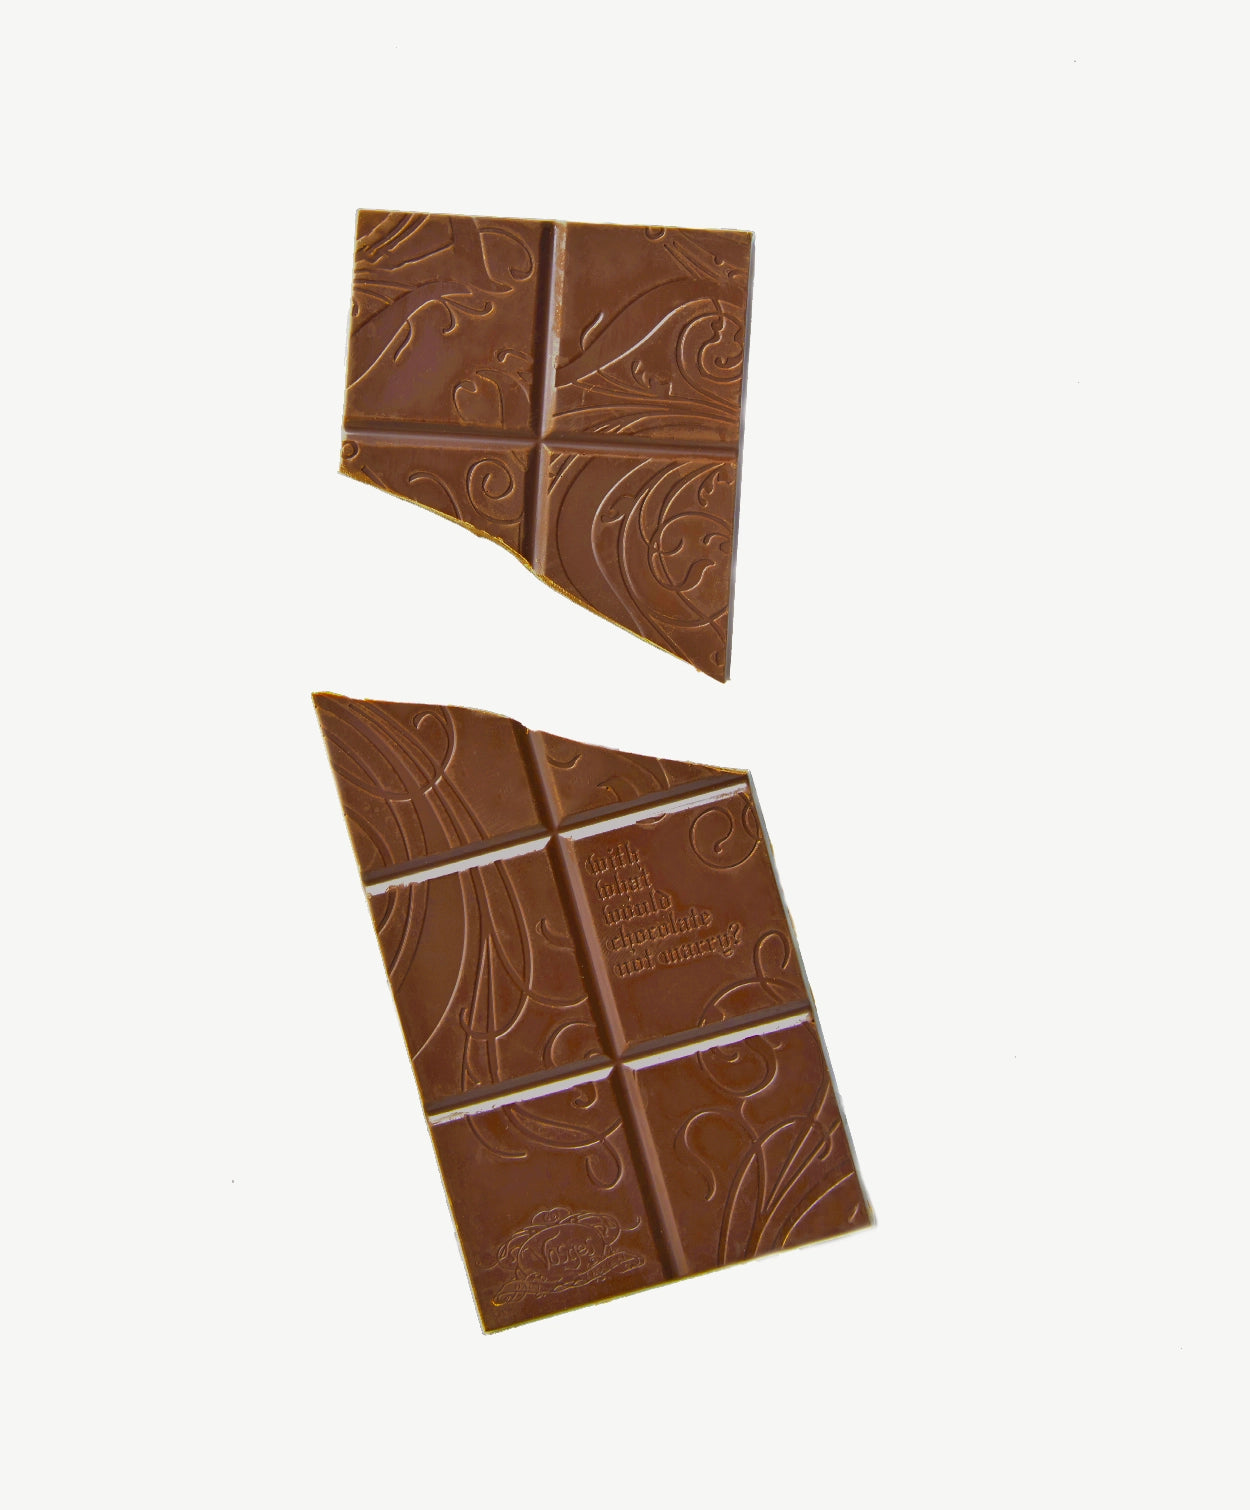 A Vosges Turmeric Ginger Chocolate bar sits broken in two on a light grey background.  